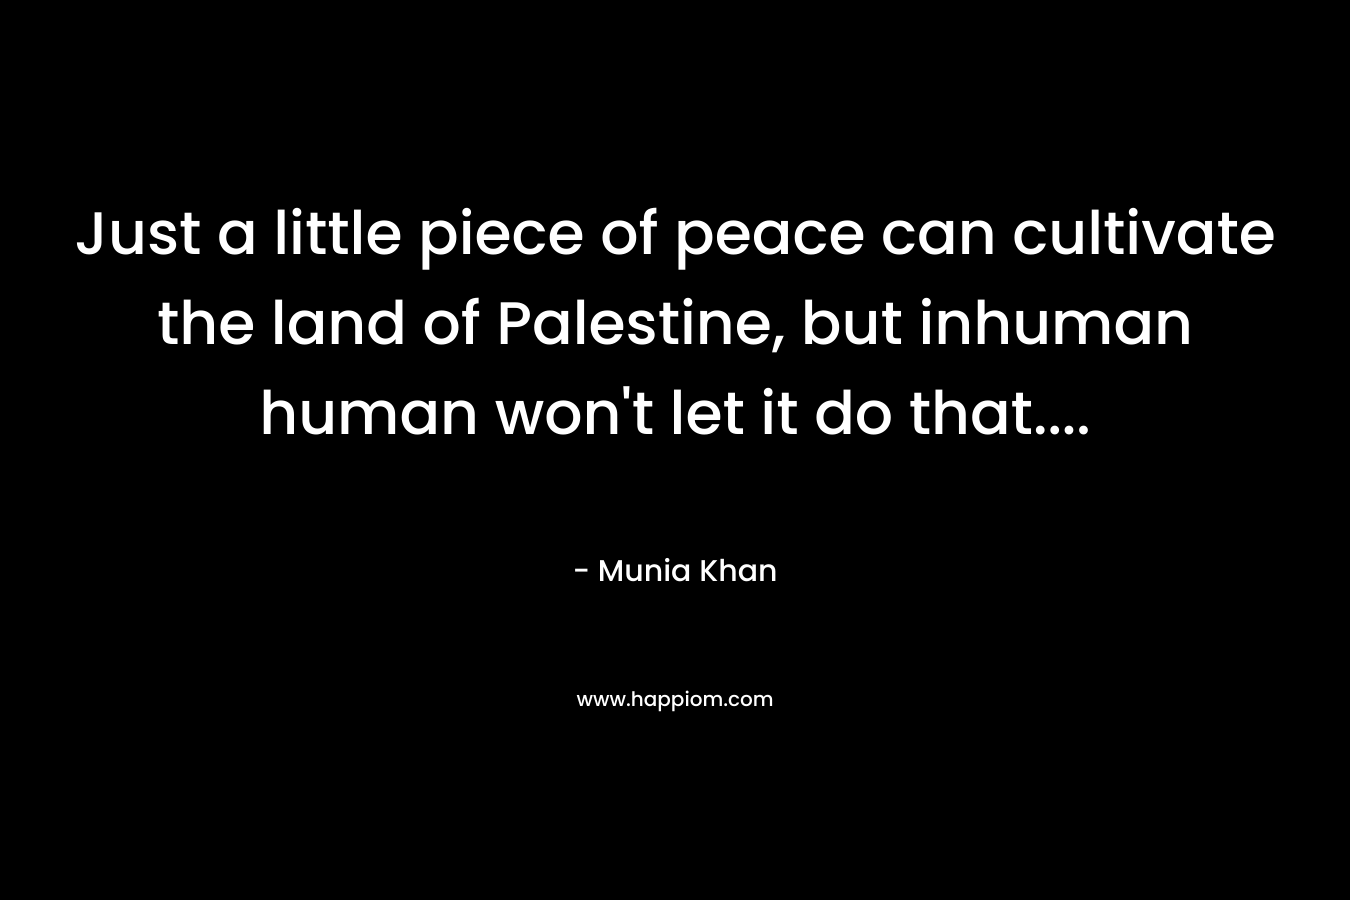 Just a little piece of peace can cultivate the land of Palestine, but inhuman human won't let it do that....